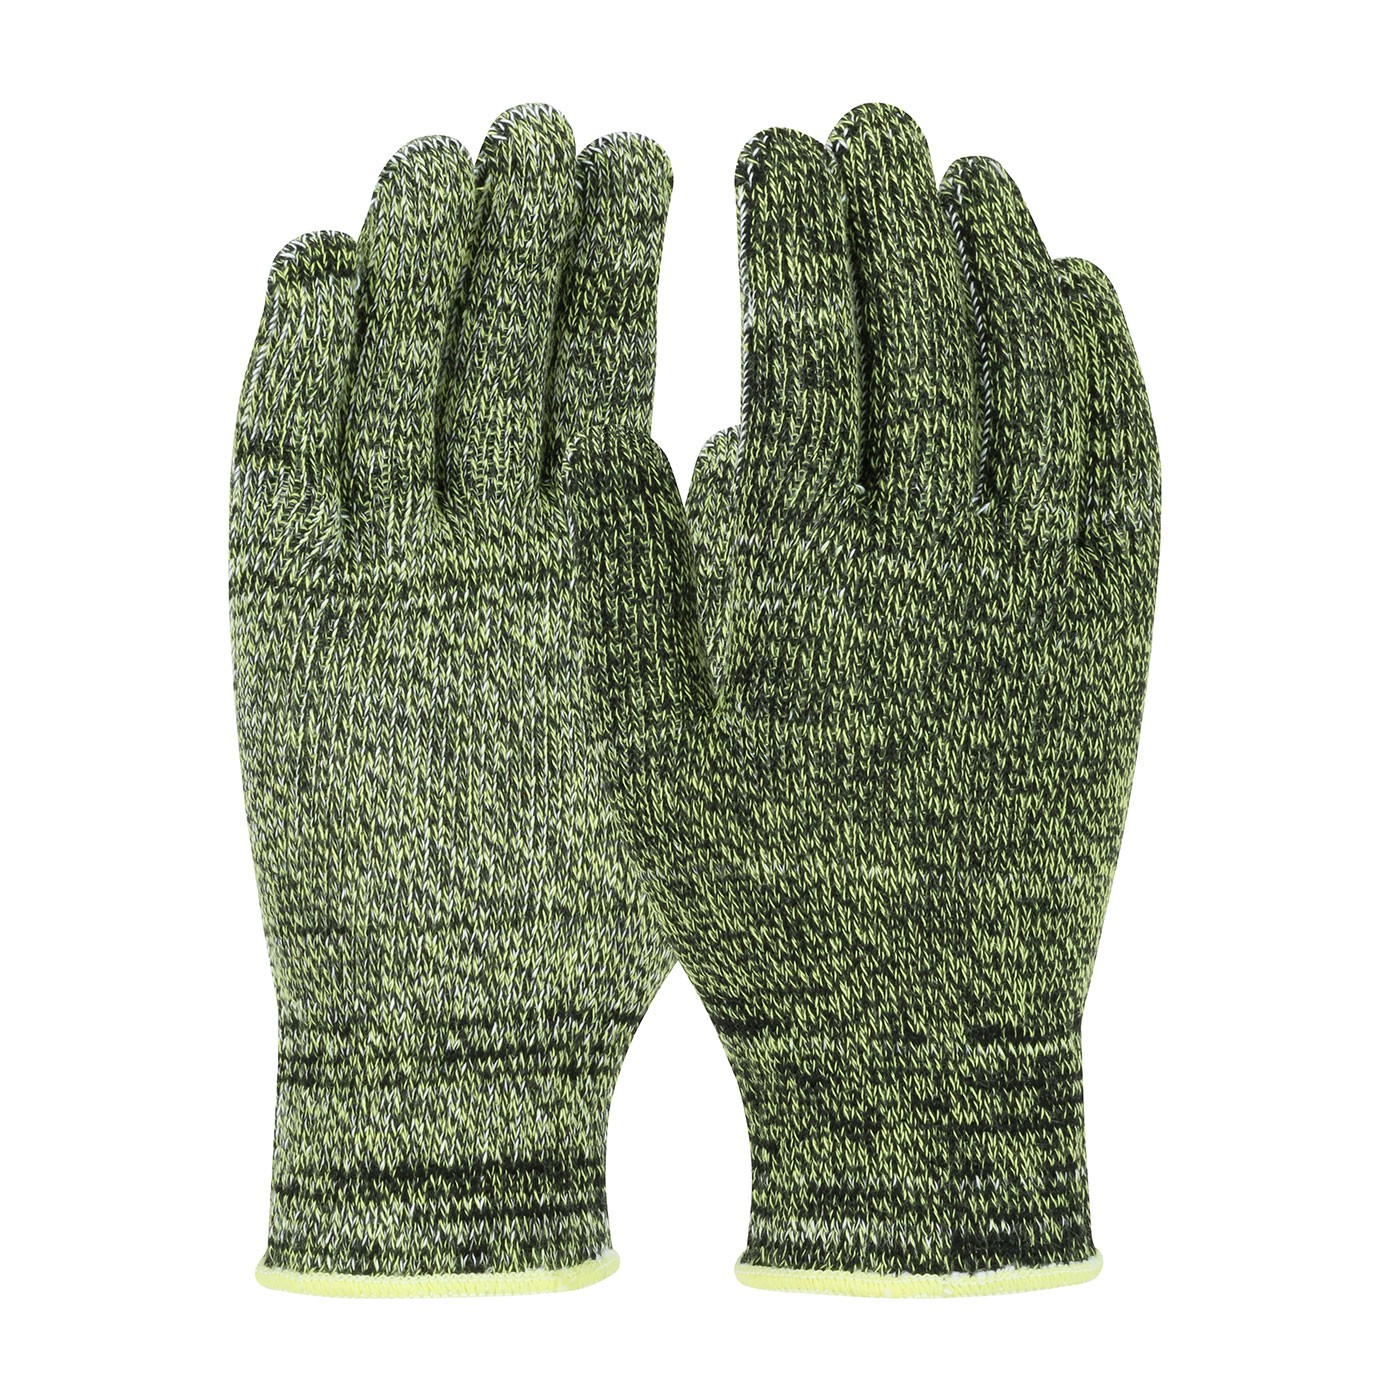 Kut Gard® Seamless Knit PolyKor® Blended Glove with Polyester Lining - Medium Weight  (#07-TW500)